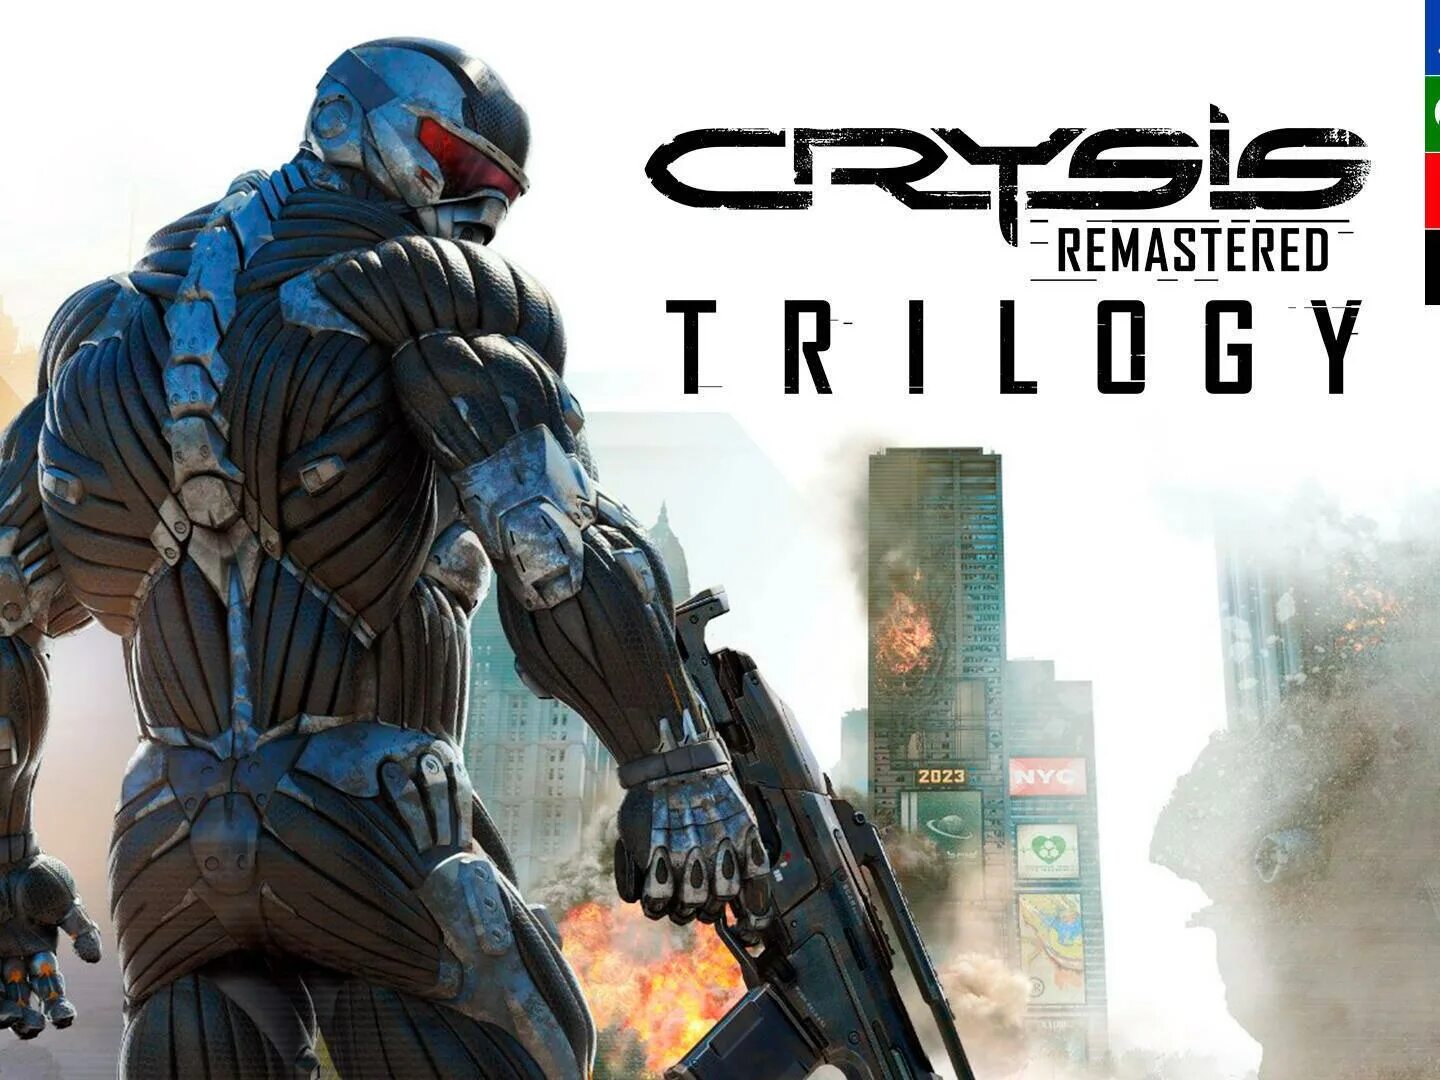 Crysis Remastered ps4. Crysis Remastered Trilogy. Crysis Remastered Trilogy ps4. Crysis 2 Remastered обложка.